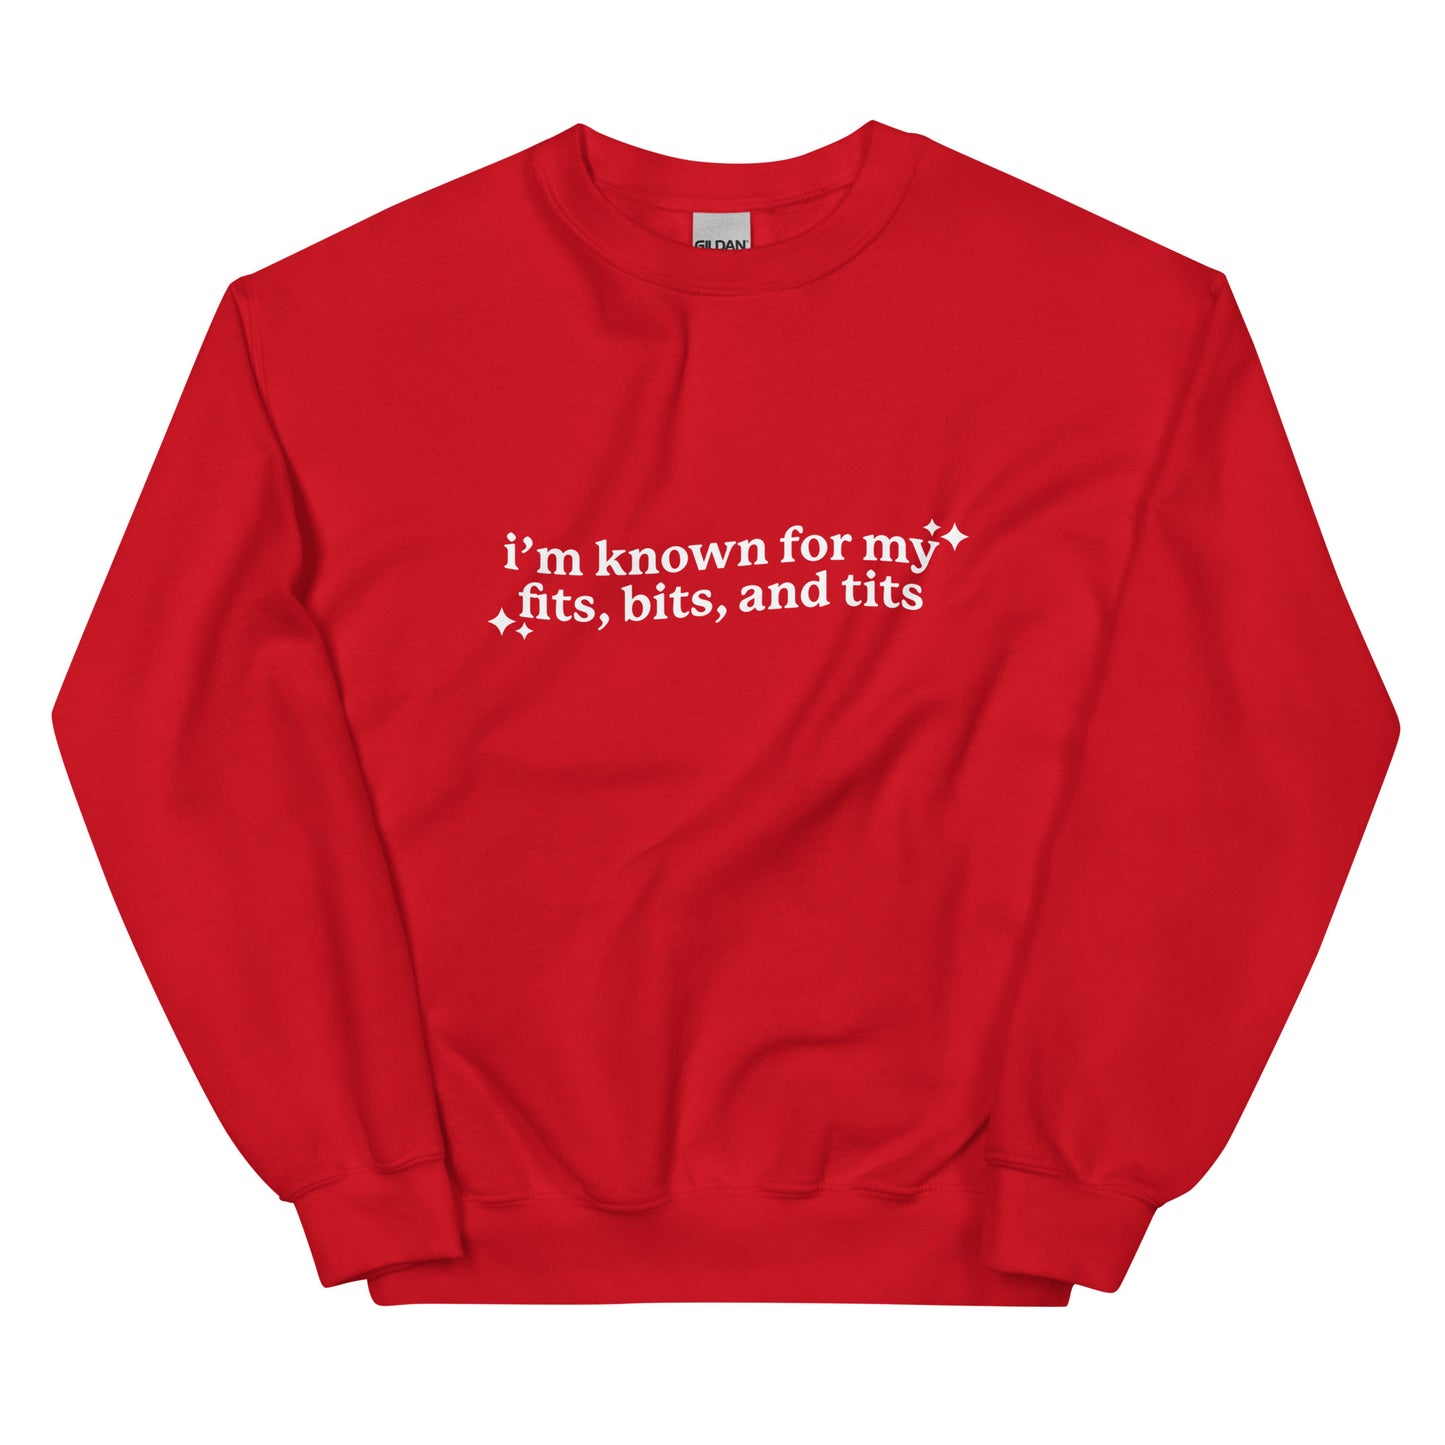 I'm Known For My Fits, Bits, and Tits Unisex Sweatshirt